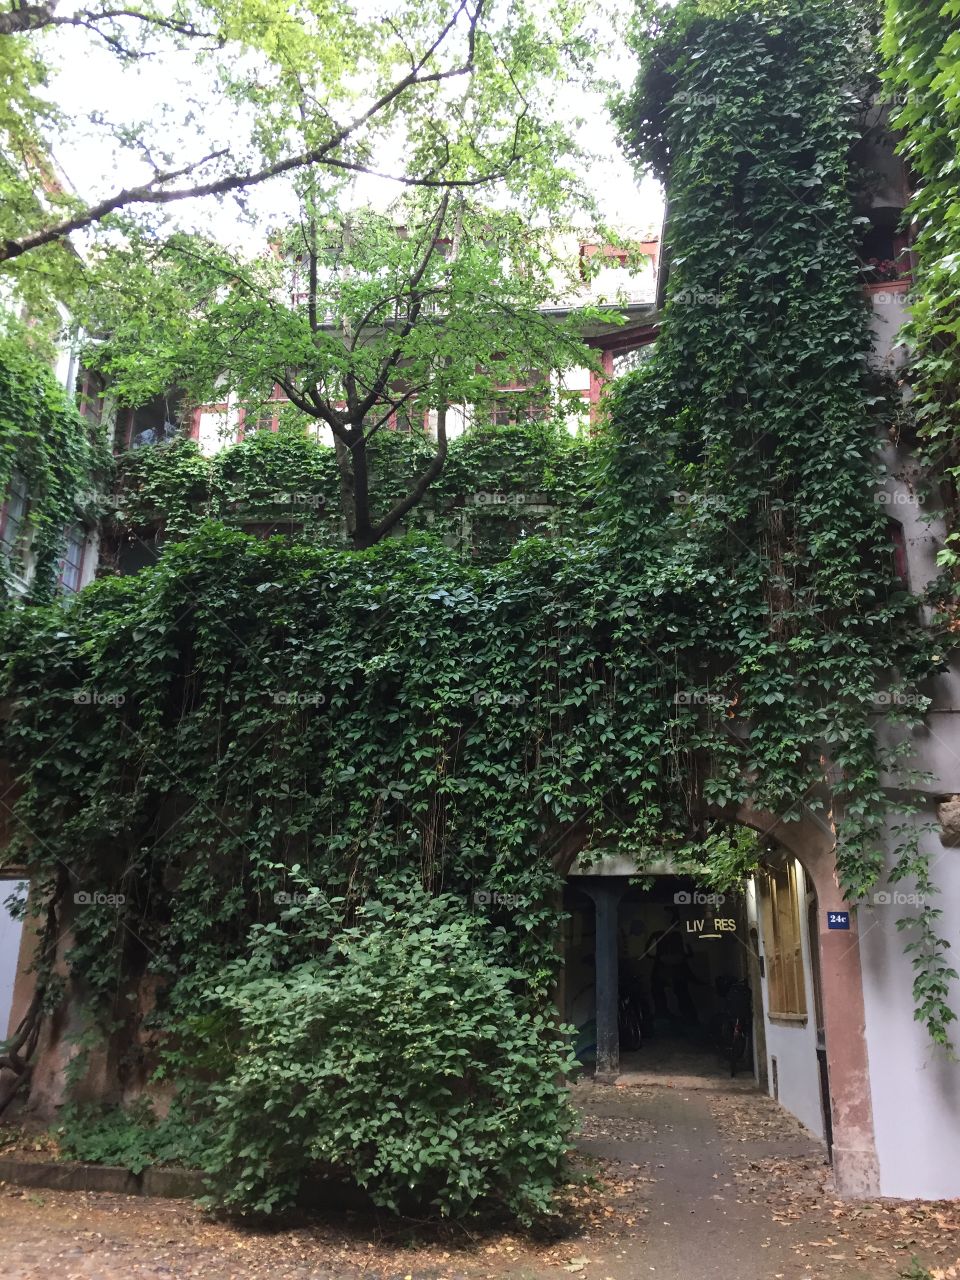 Bookstore in Nancy France hidden in vines, ancient books sell